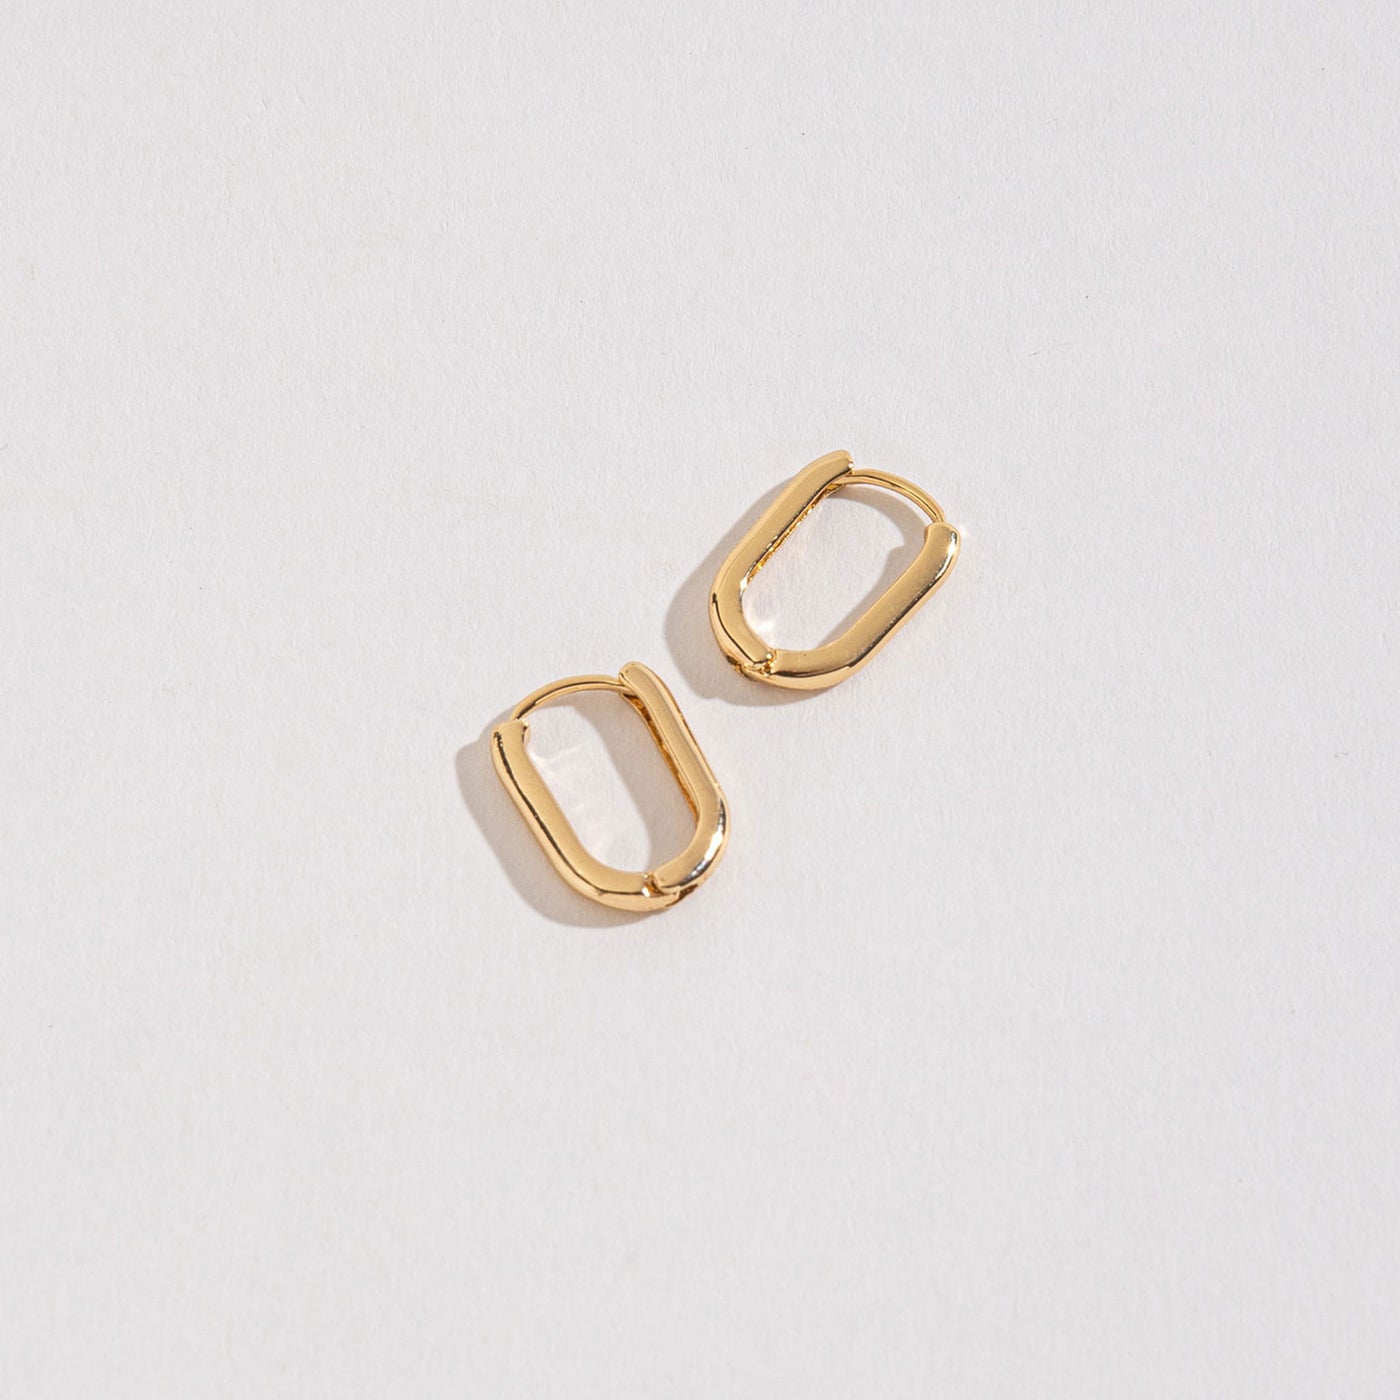 gold link huggie hoops on a white background.